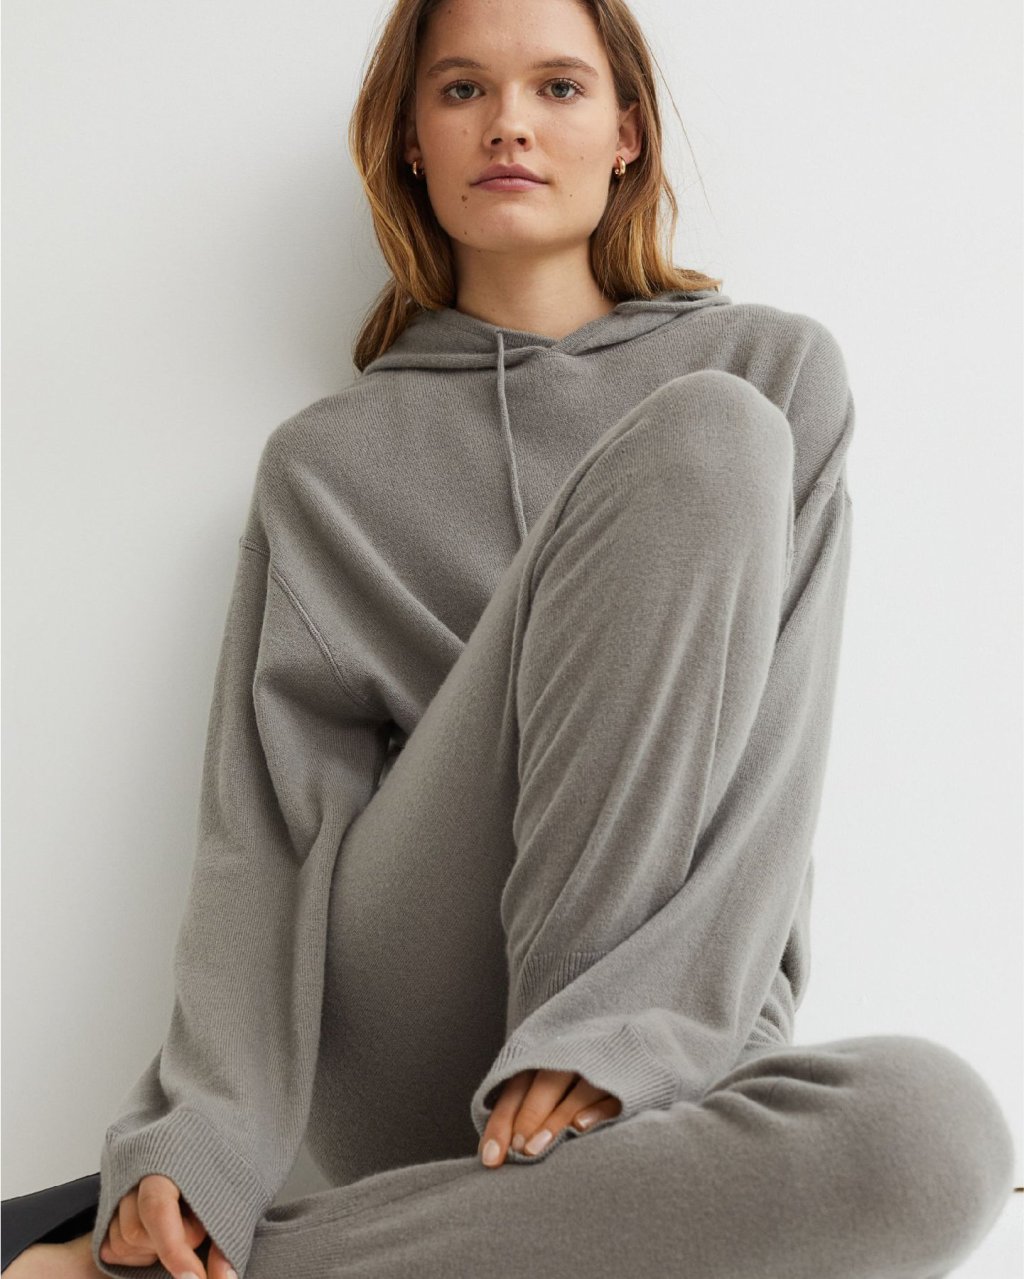 Best Loungewear For Women: The Comfiest Tops And Bottoms To Chill In